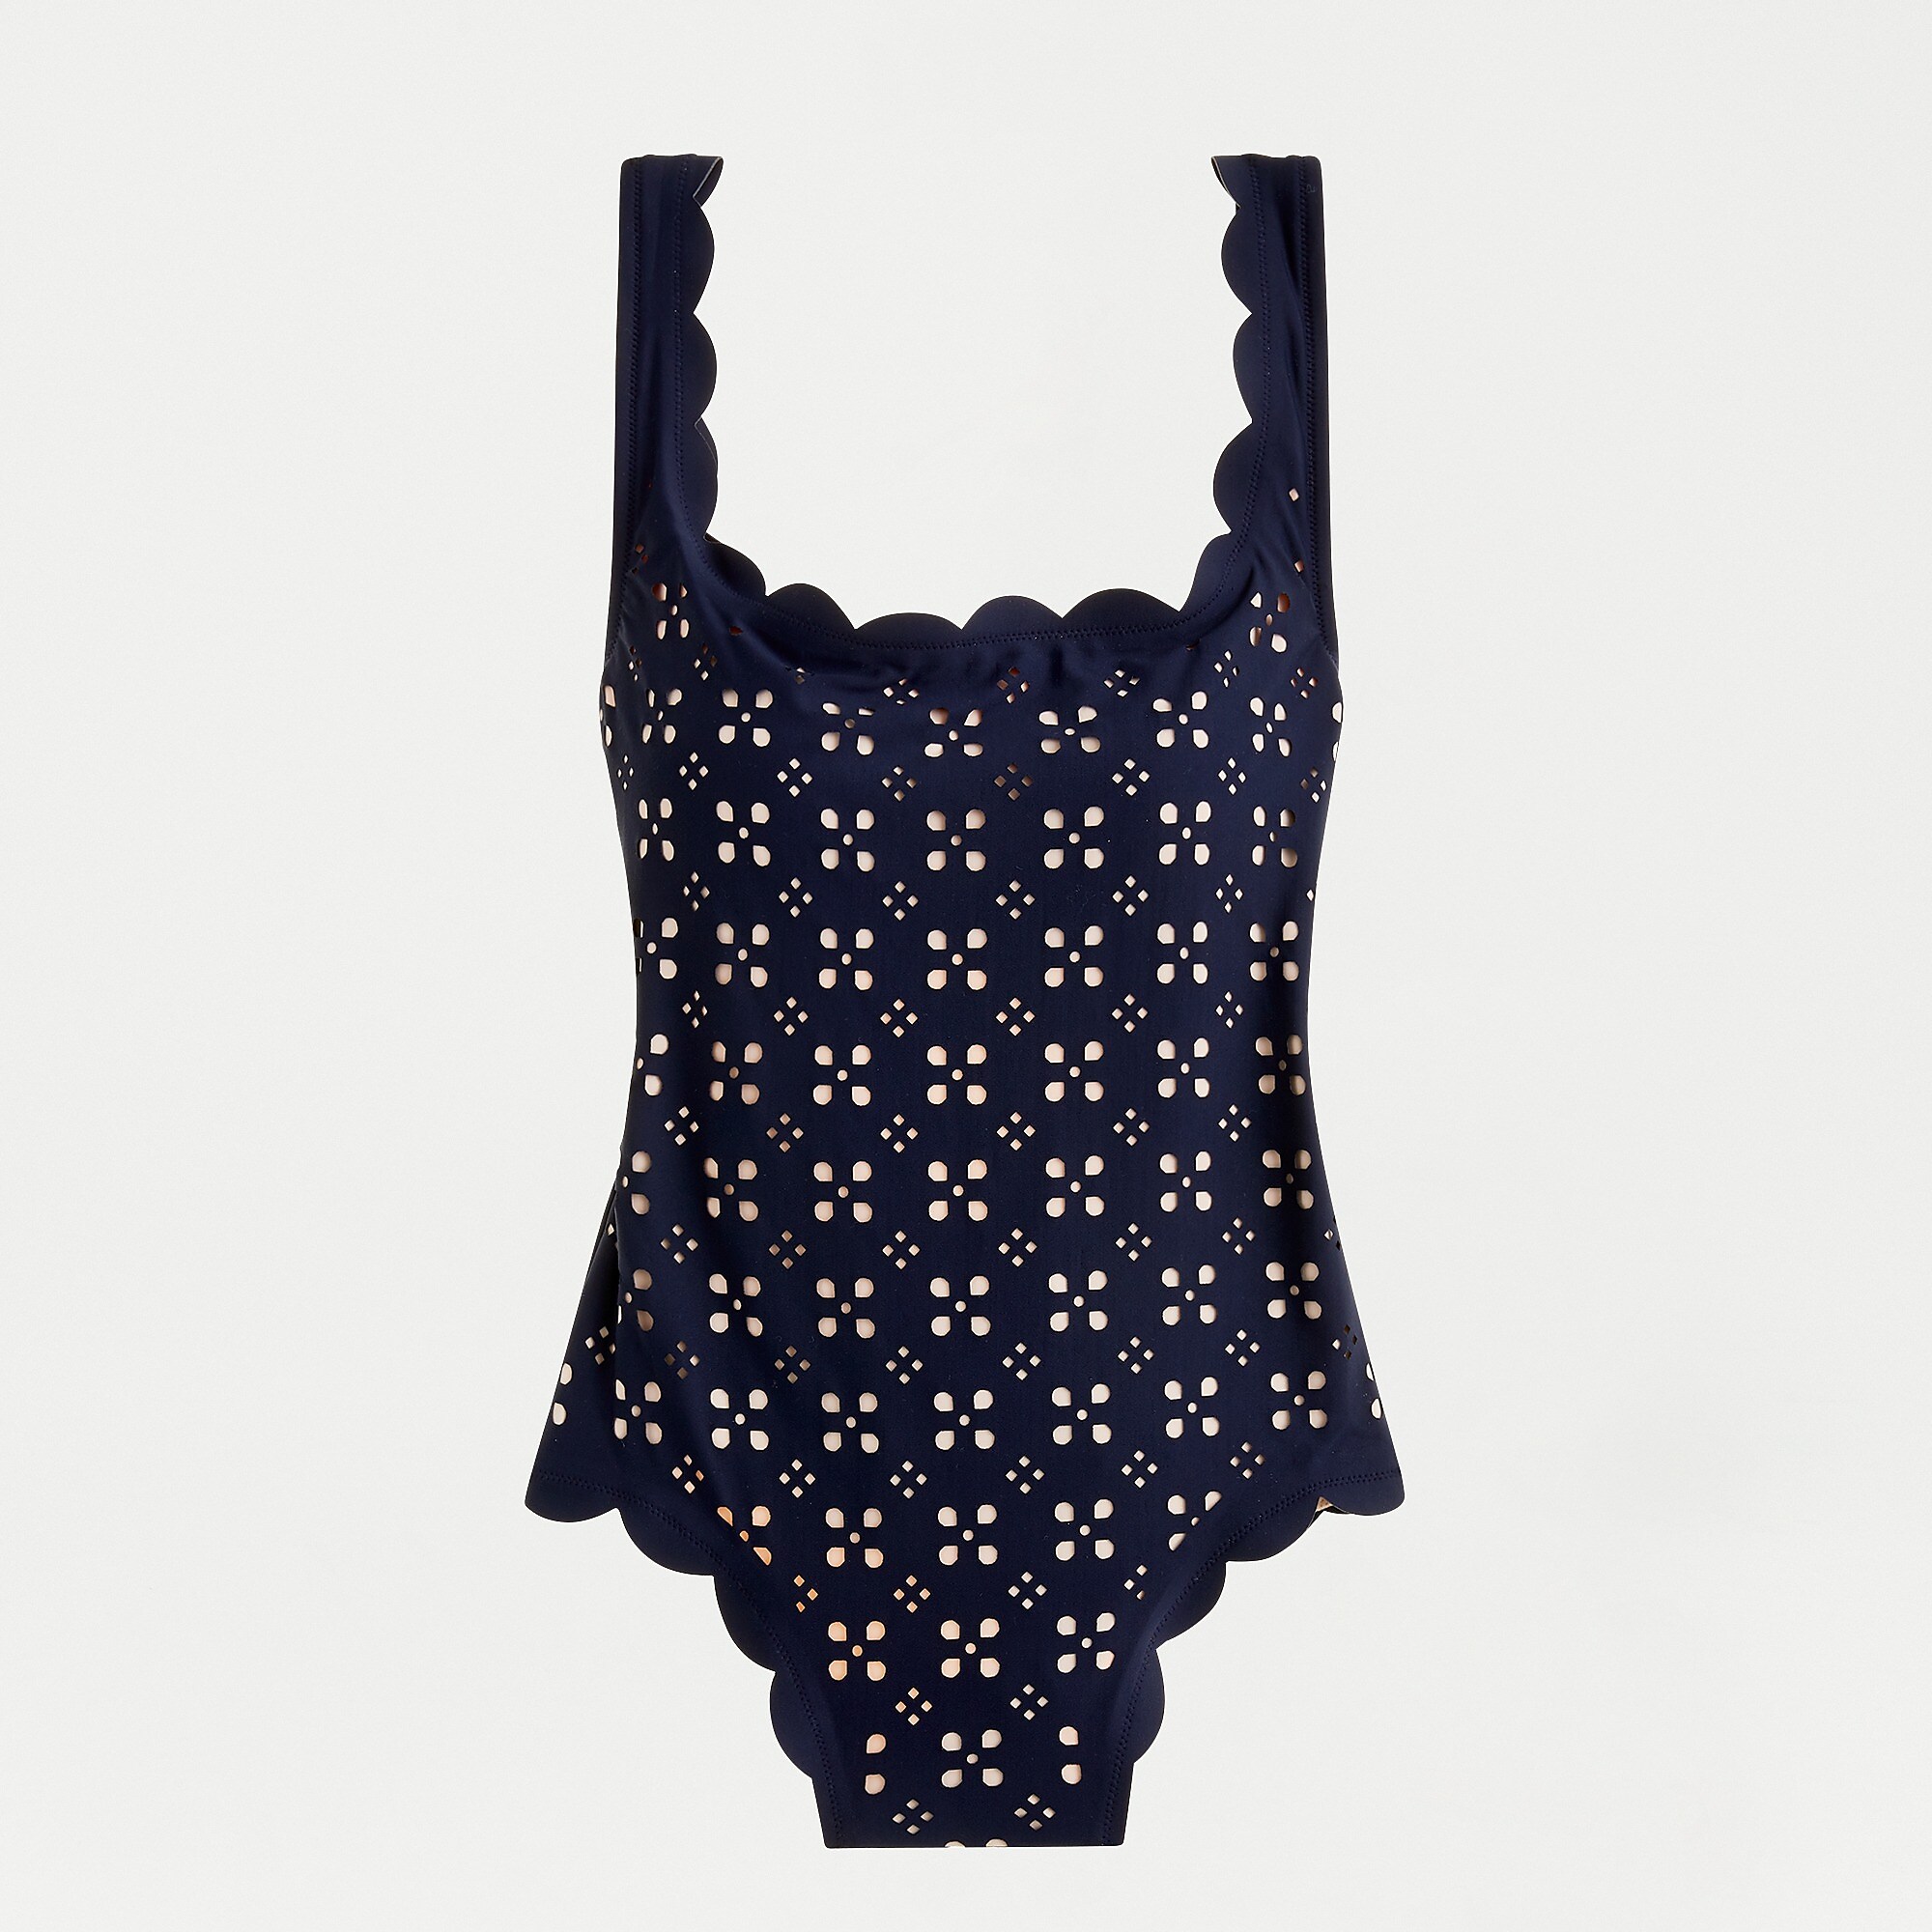 J.Crew: Scalloped One-piece Swimsuit In Laser-cut Eyelet For Women